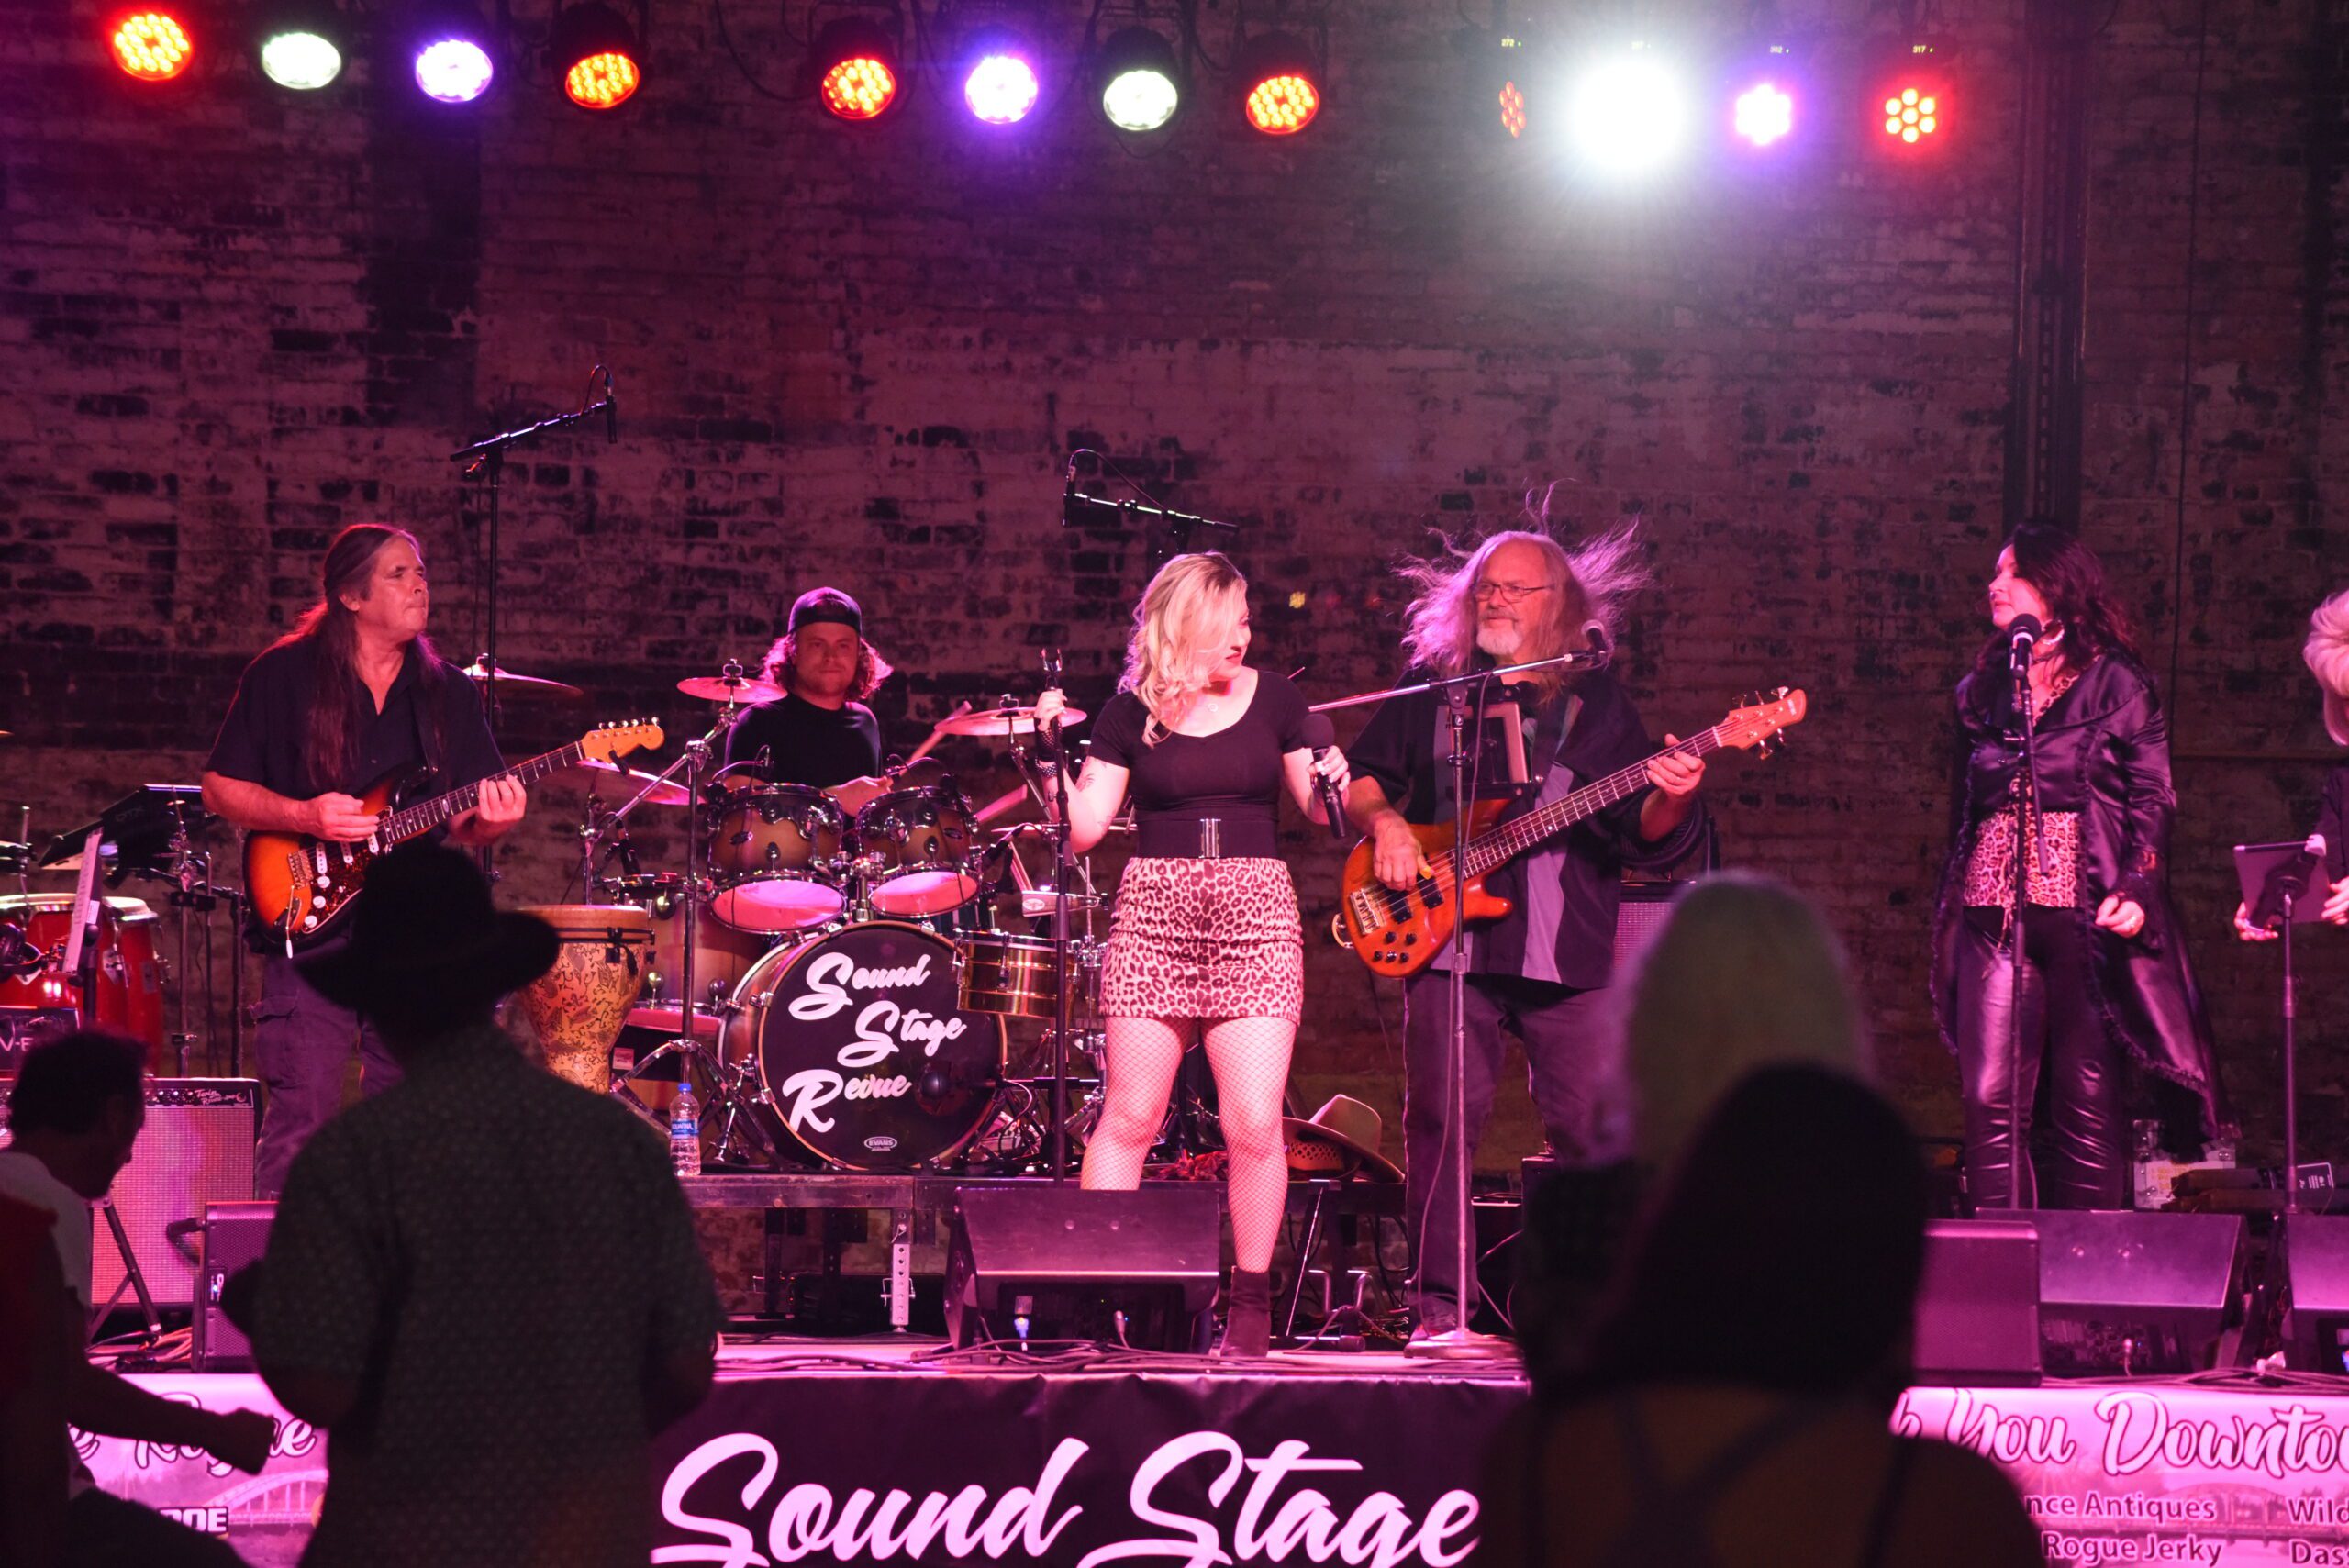 Five band members are playing live music, two singers, two guitarists, and a drummer. They are in front of a brick wall and under glowing purple and red lights.